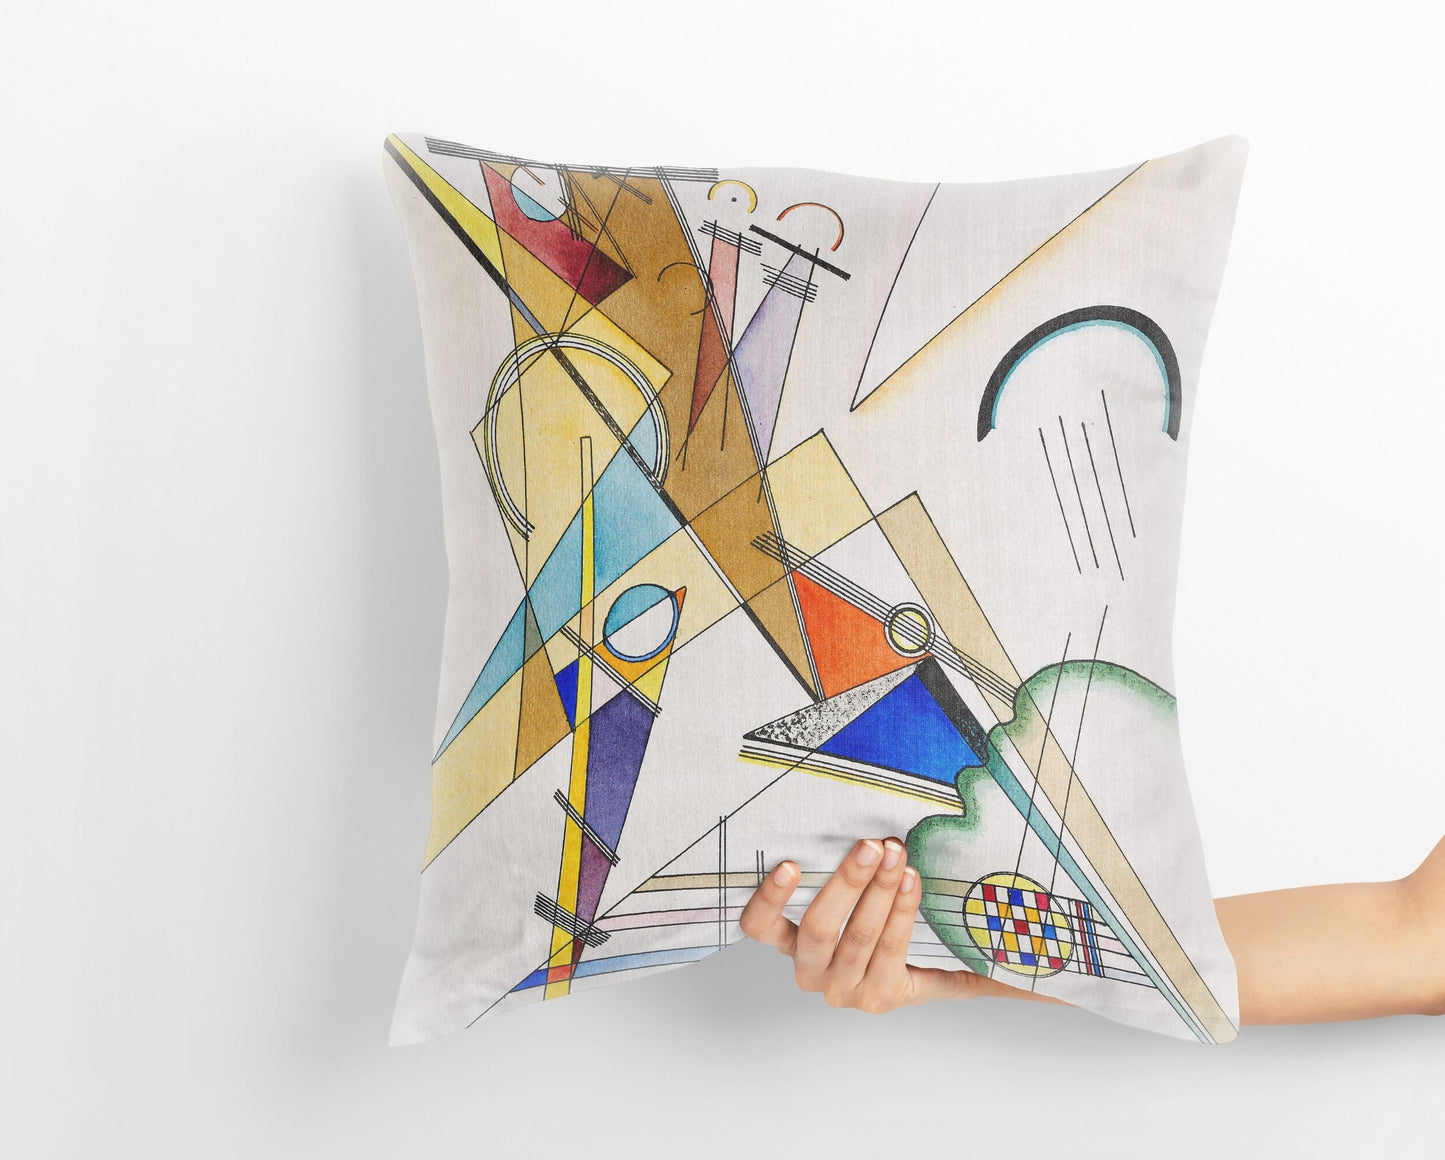 Wassily Kandinsky Abstract Painting, Throw Pillow Cover, Geometric Pillow, Soft Pillow Cases, Colorful Pillow Case, Indoor Pillow Cases